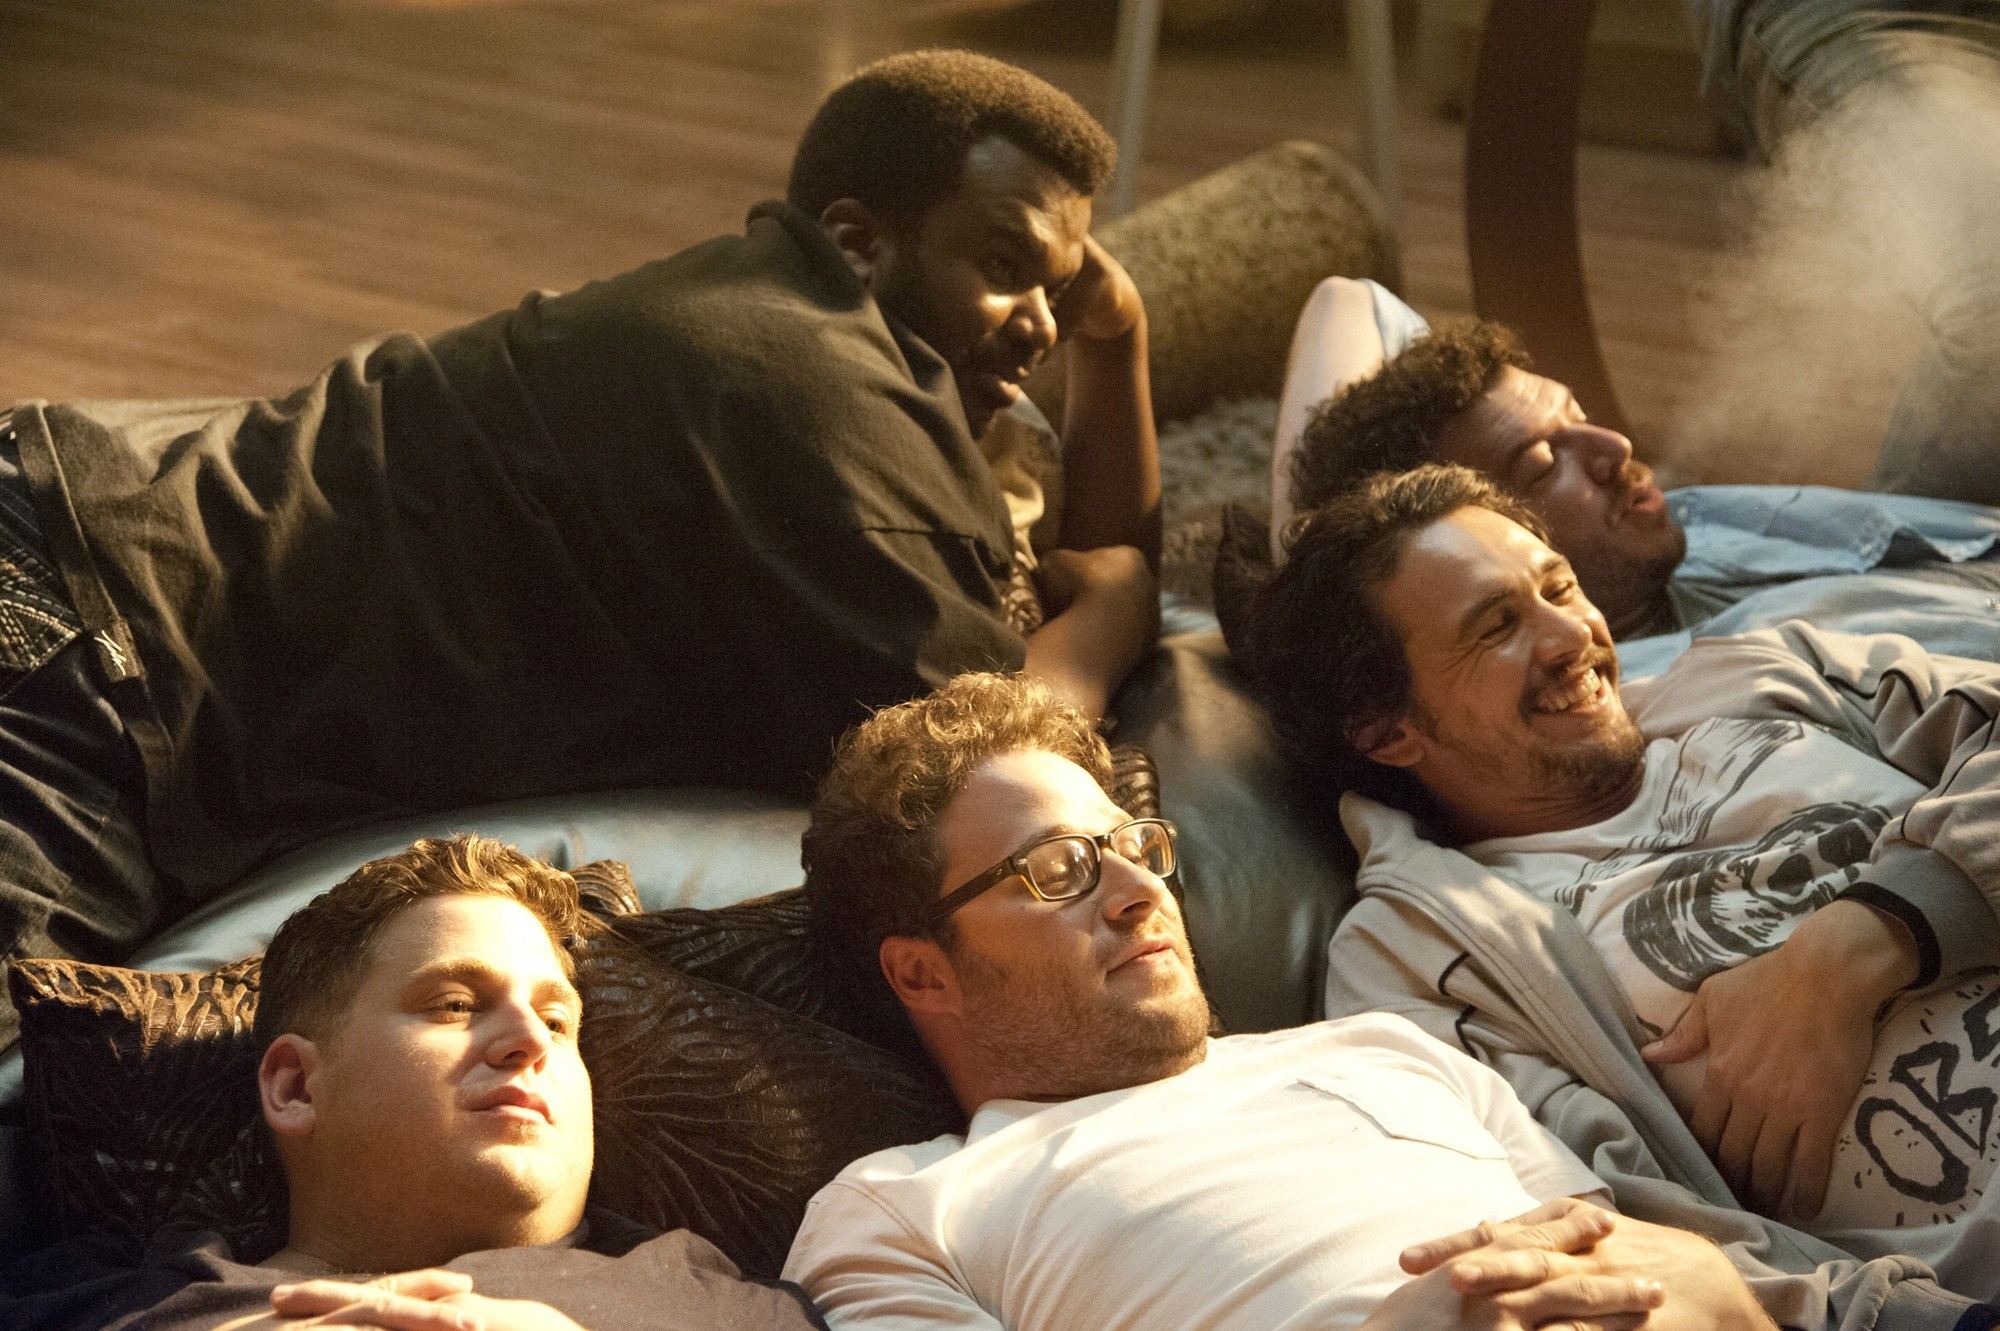 Jonah Hill, Craig Robinson, Seth Rogen, James Franco and Danny McBride in Columbia Pictures' This Is the End (2013)